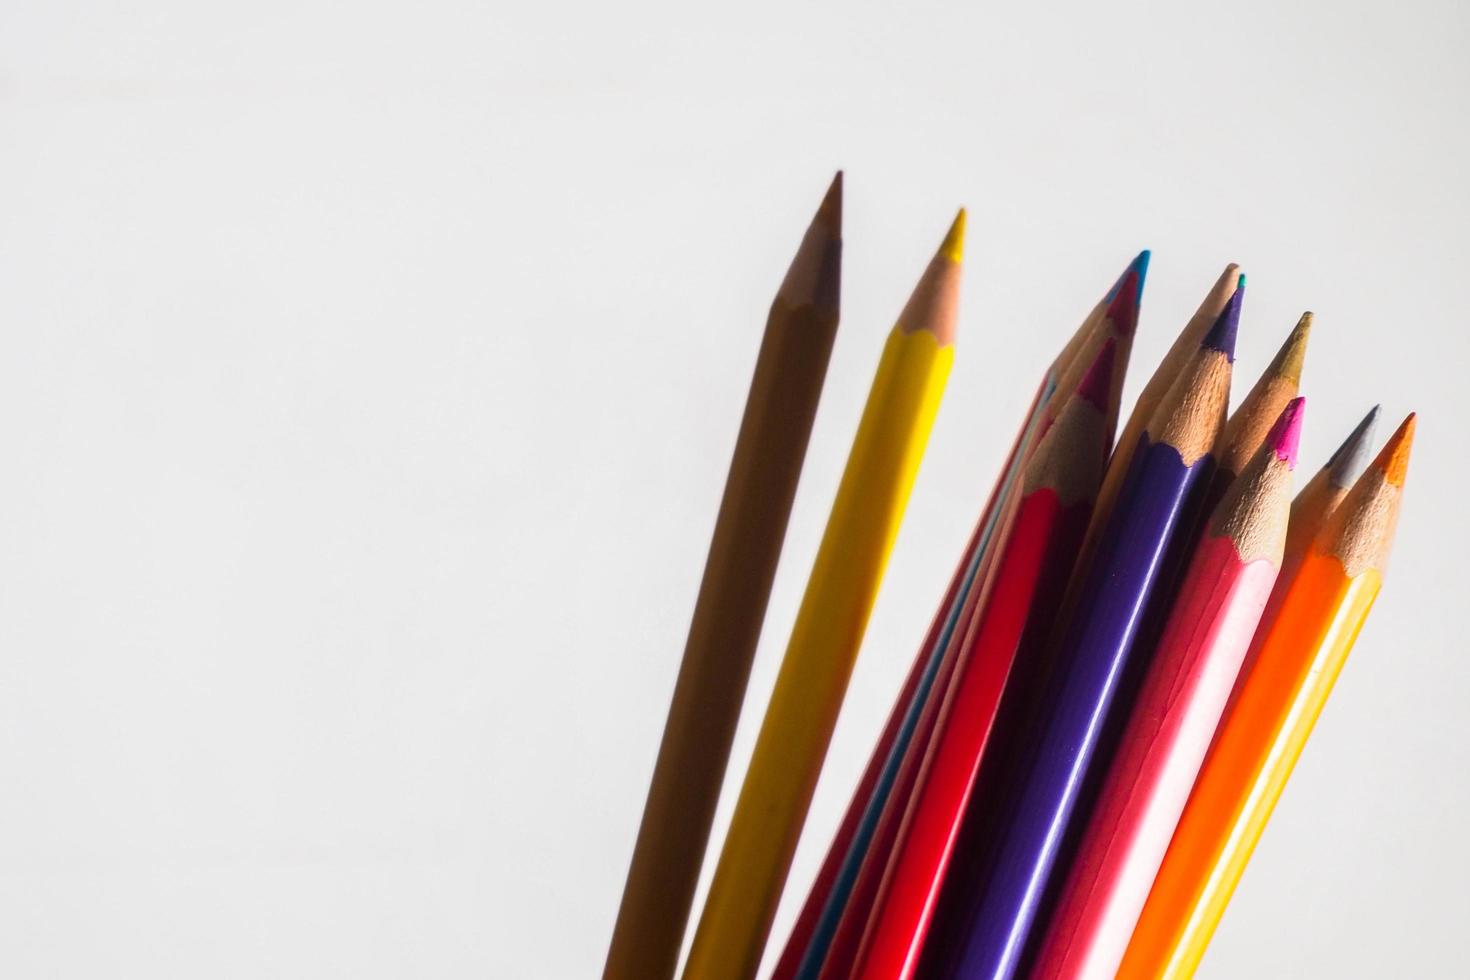 colored pencils for students to use in school or professional photo